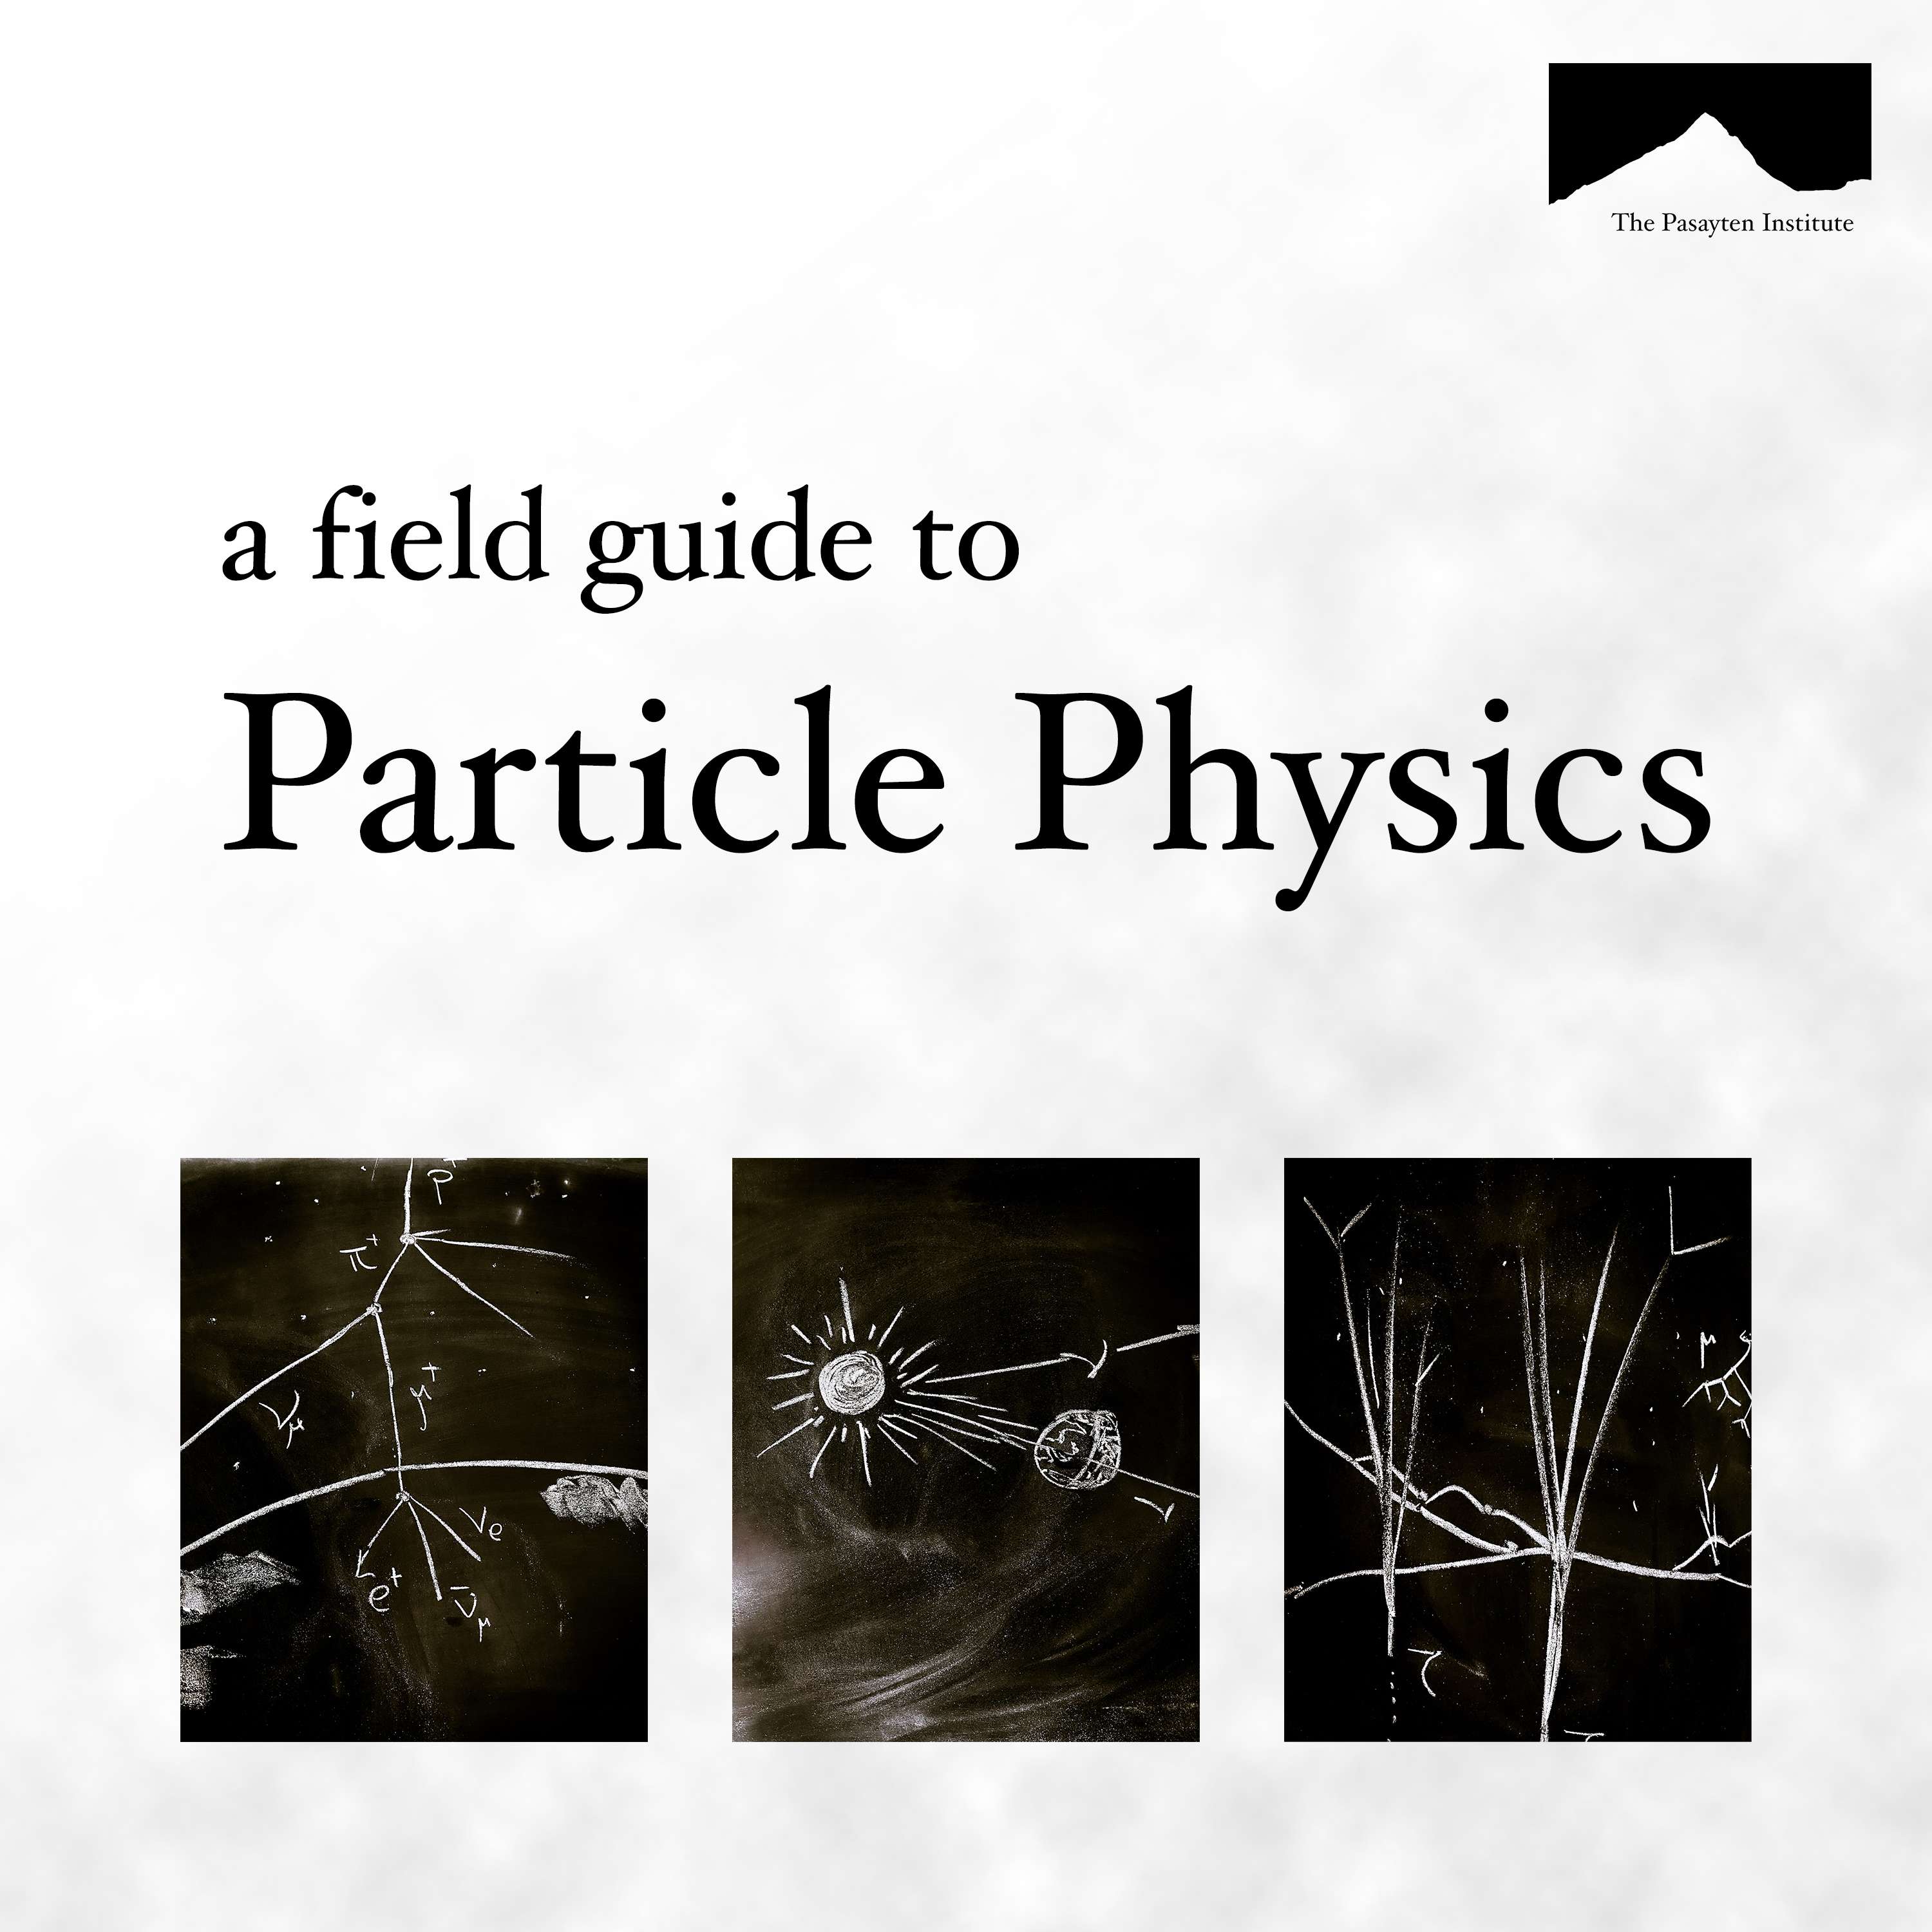 The Field Guide to Particle Physics Image